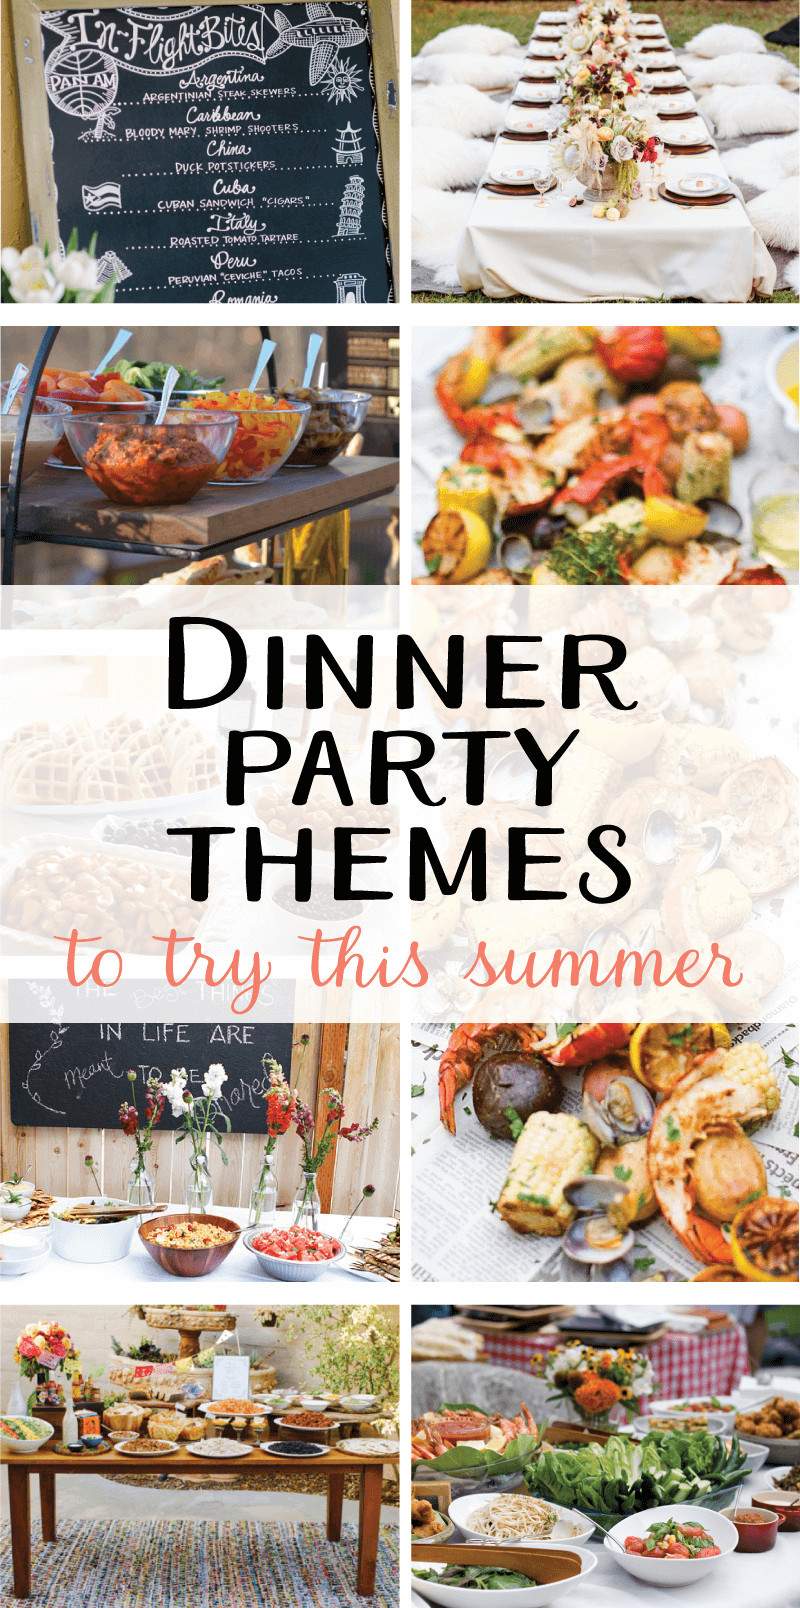 Ideas For Dinner Party
 9 Creative Dinner Party Themes to Try this Summer on Love